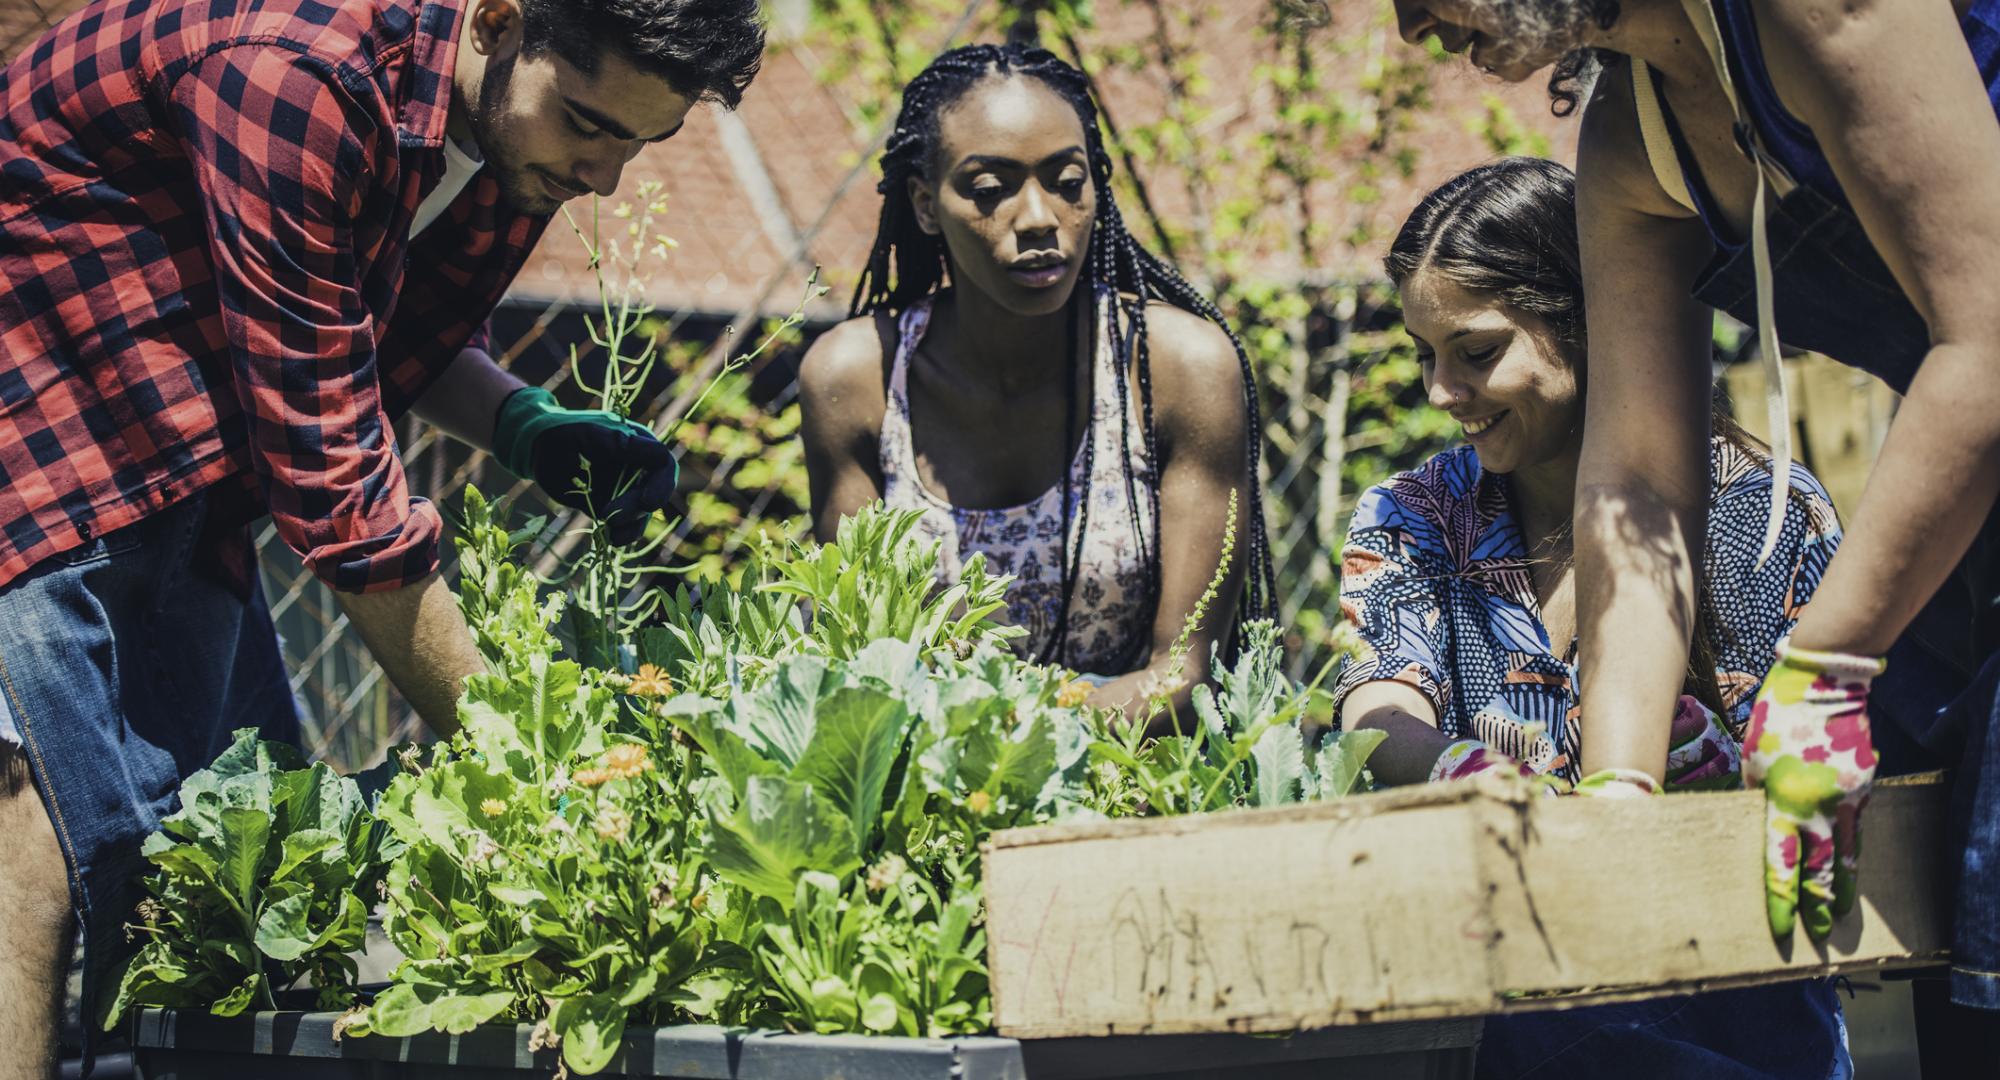 Group of young people engaging with their community by gardening.